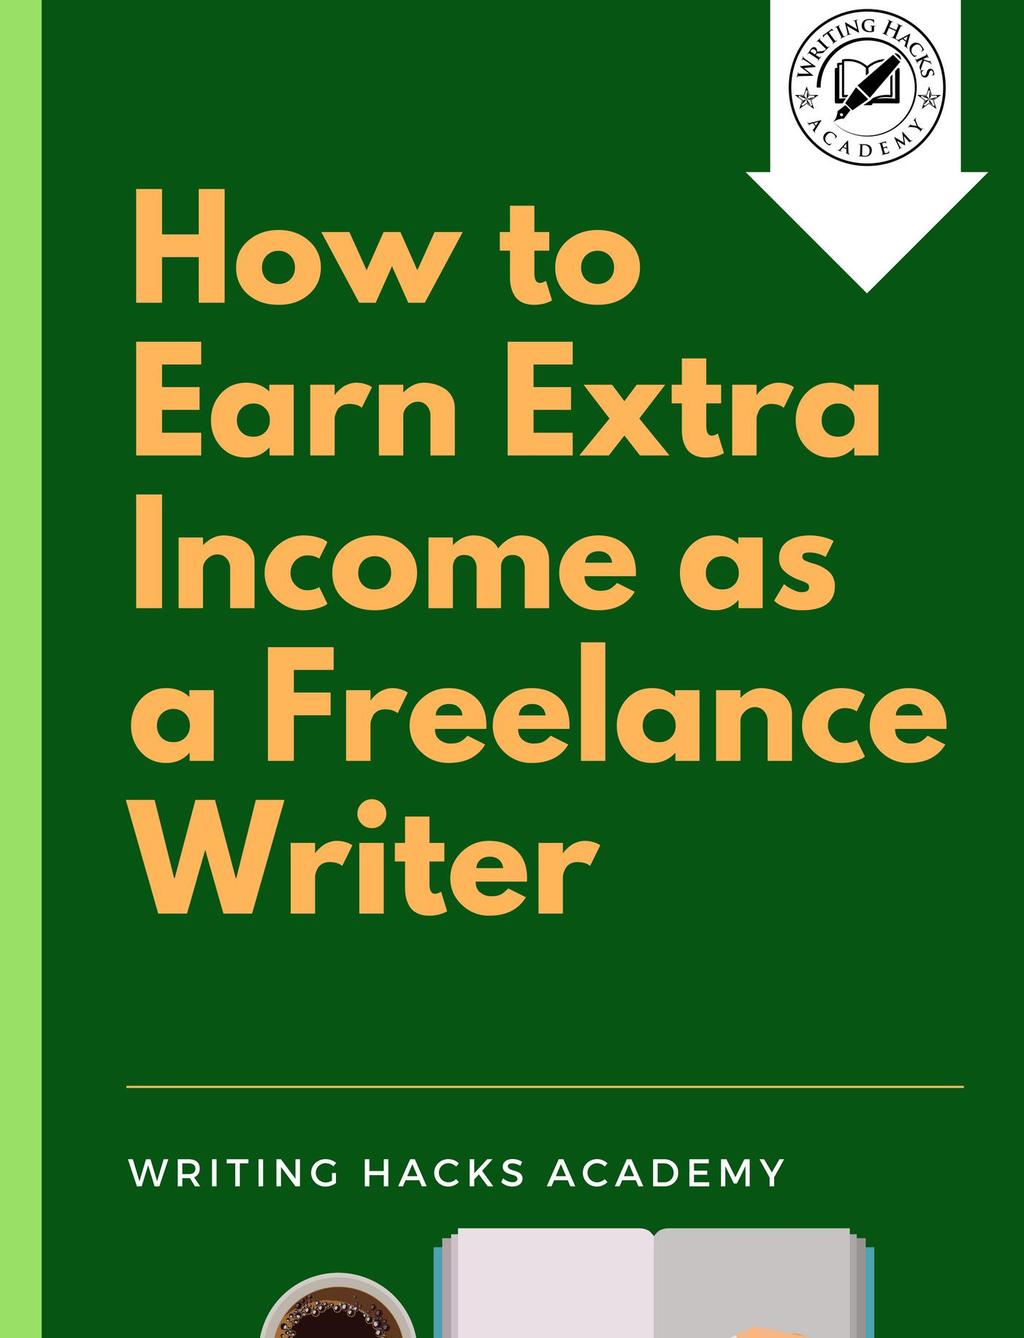 How to Earn Extra